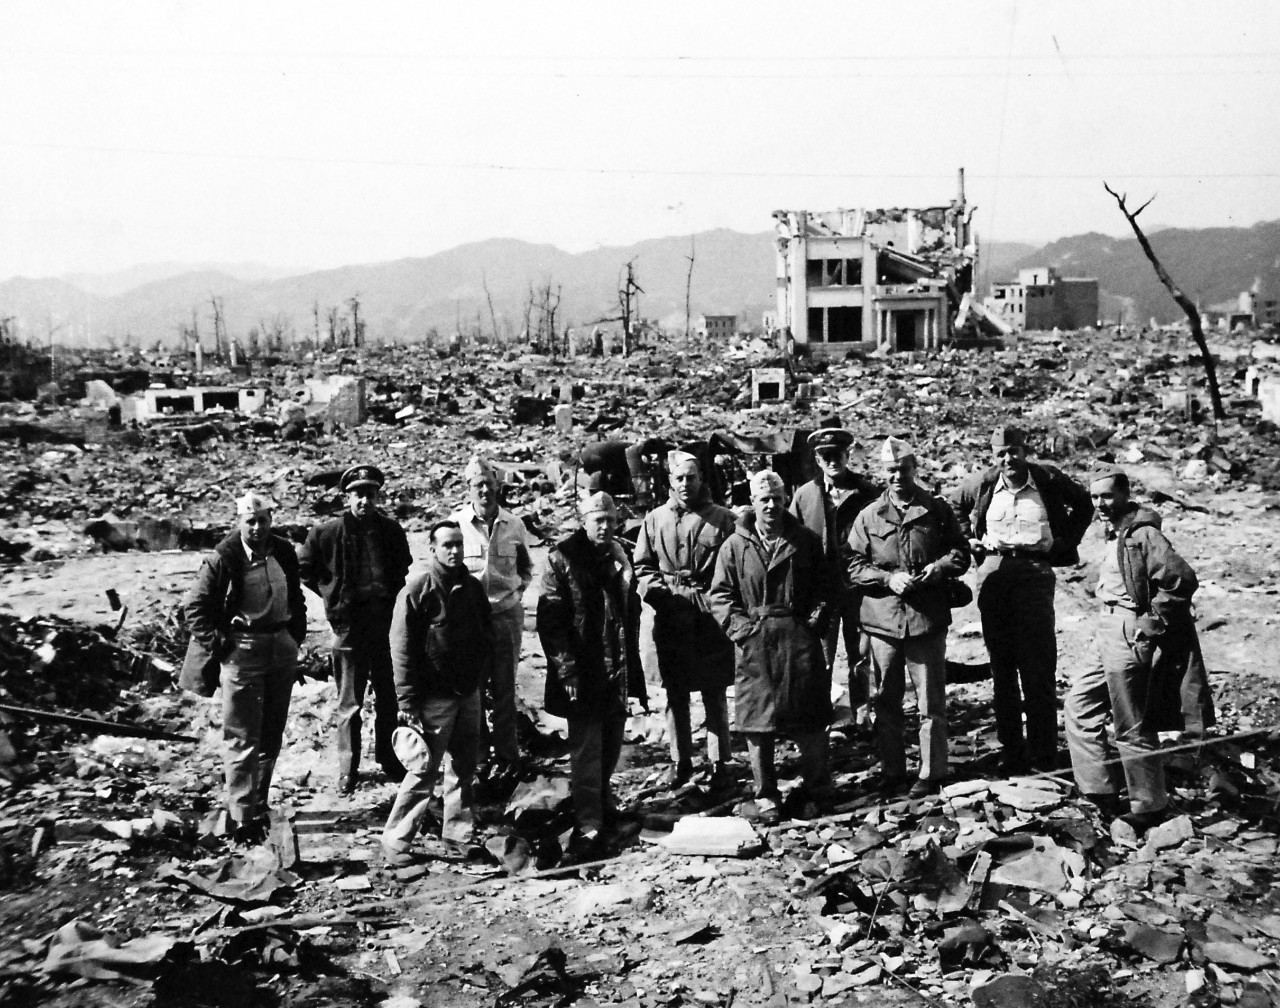 80-G-354619:  Hiroshima, Japan, 1945.   Atomic Bomb Damage to Hiroshima, as seen by USS Appalachian (AGC-1).   Officers of USS Appalachian (AGC-1) at bomb damaged Hiroshima. Photographed by PhoM3/C George Almarez.  Photographed received October 26, 1945.  U.S. Navy photograph, now in the collections of the National Archives.  (2016/06/21).